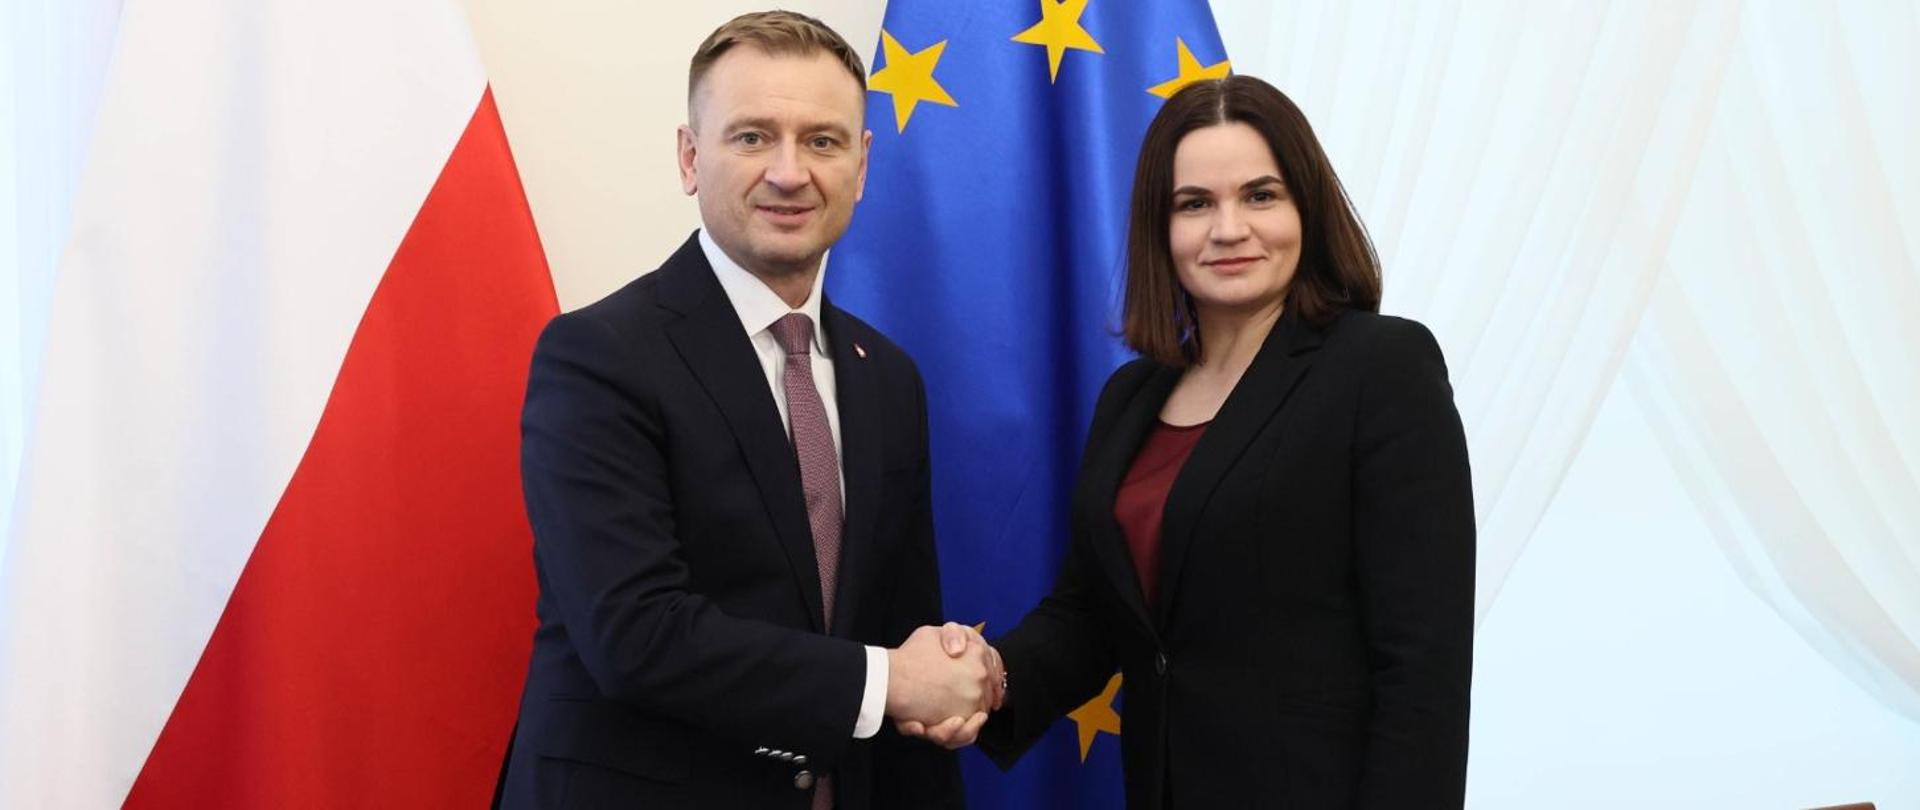 man and woman in suits shake hands with UE and Polish flags in the background